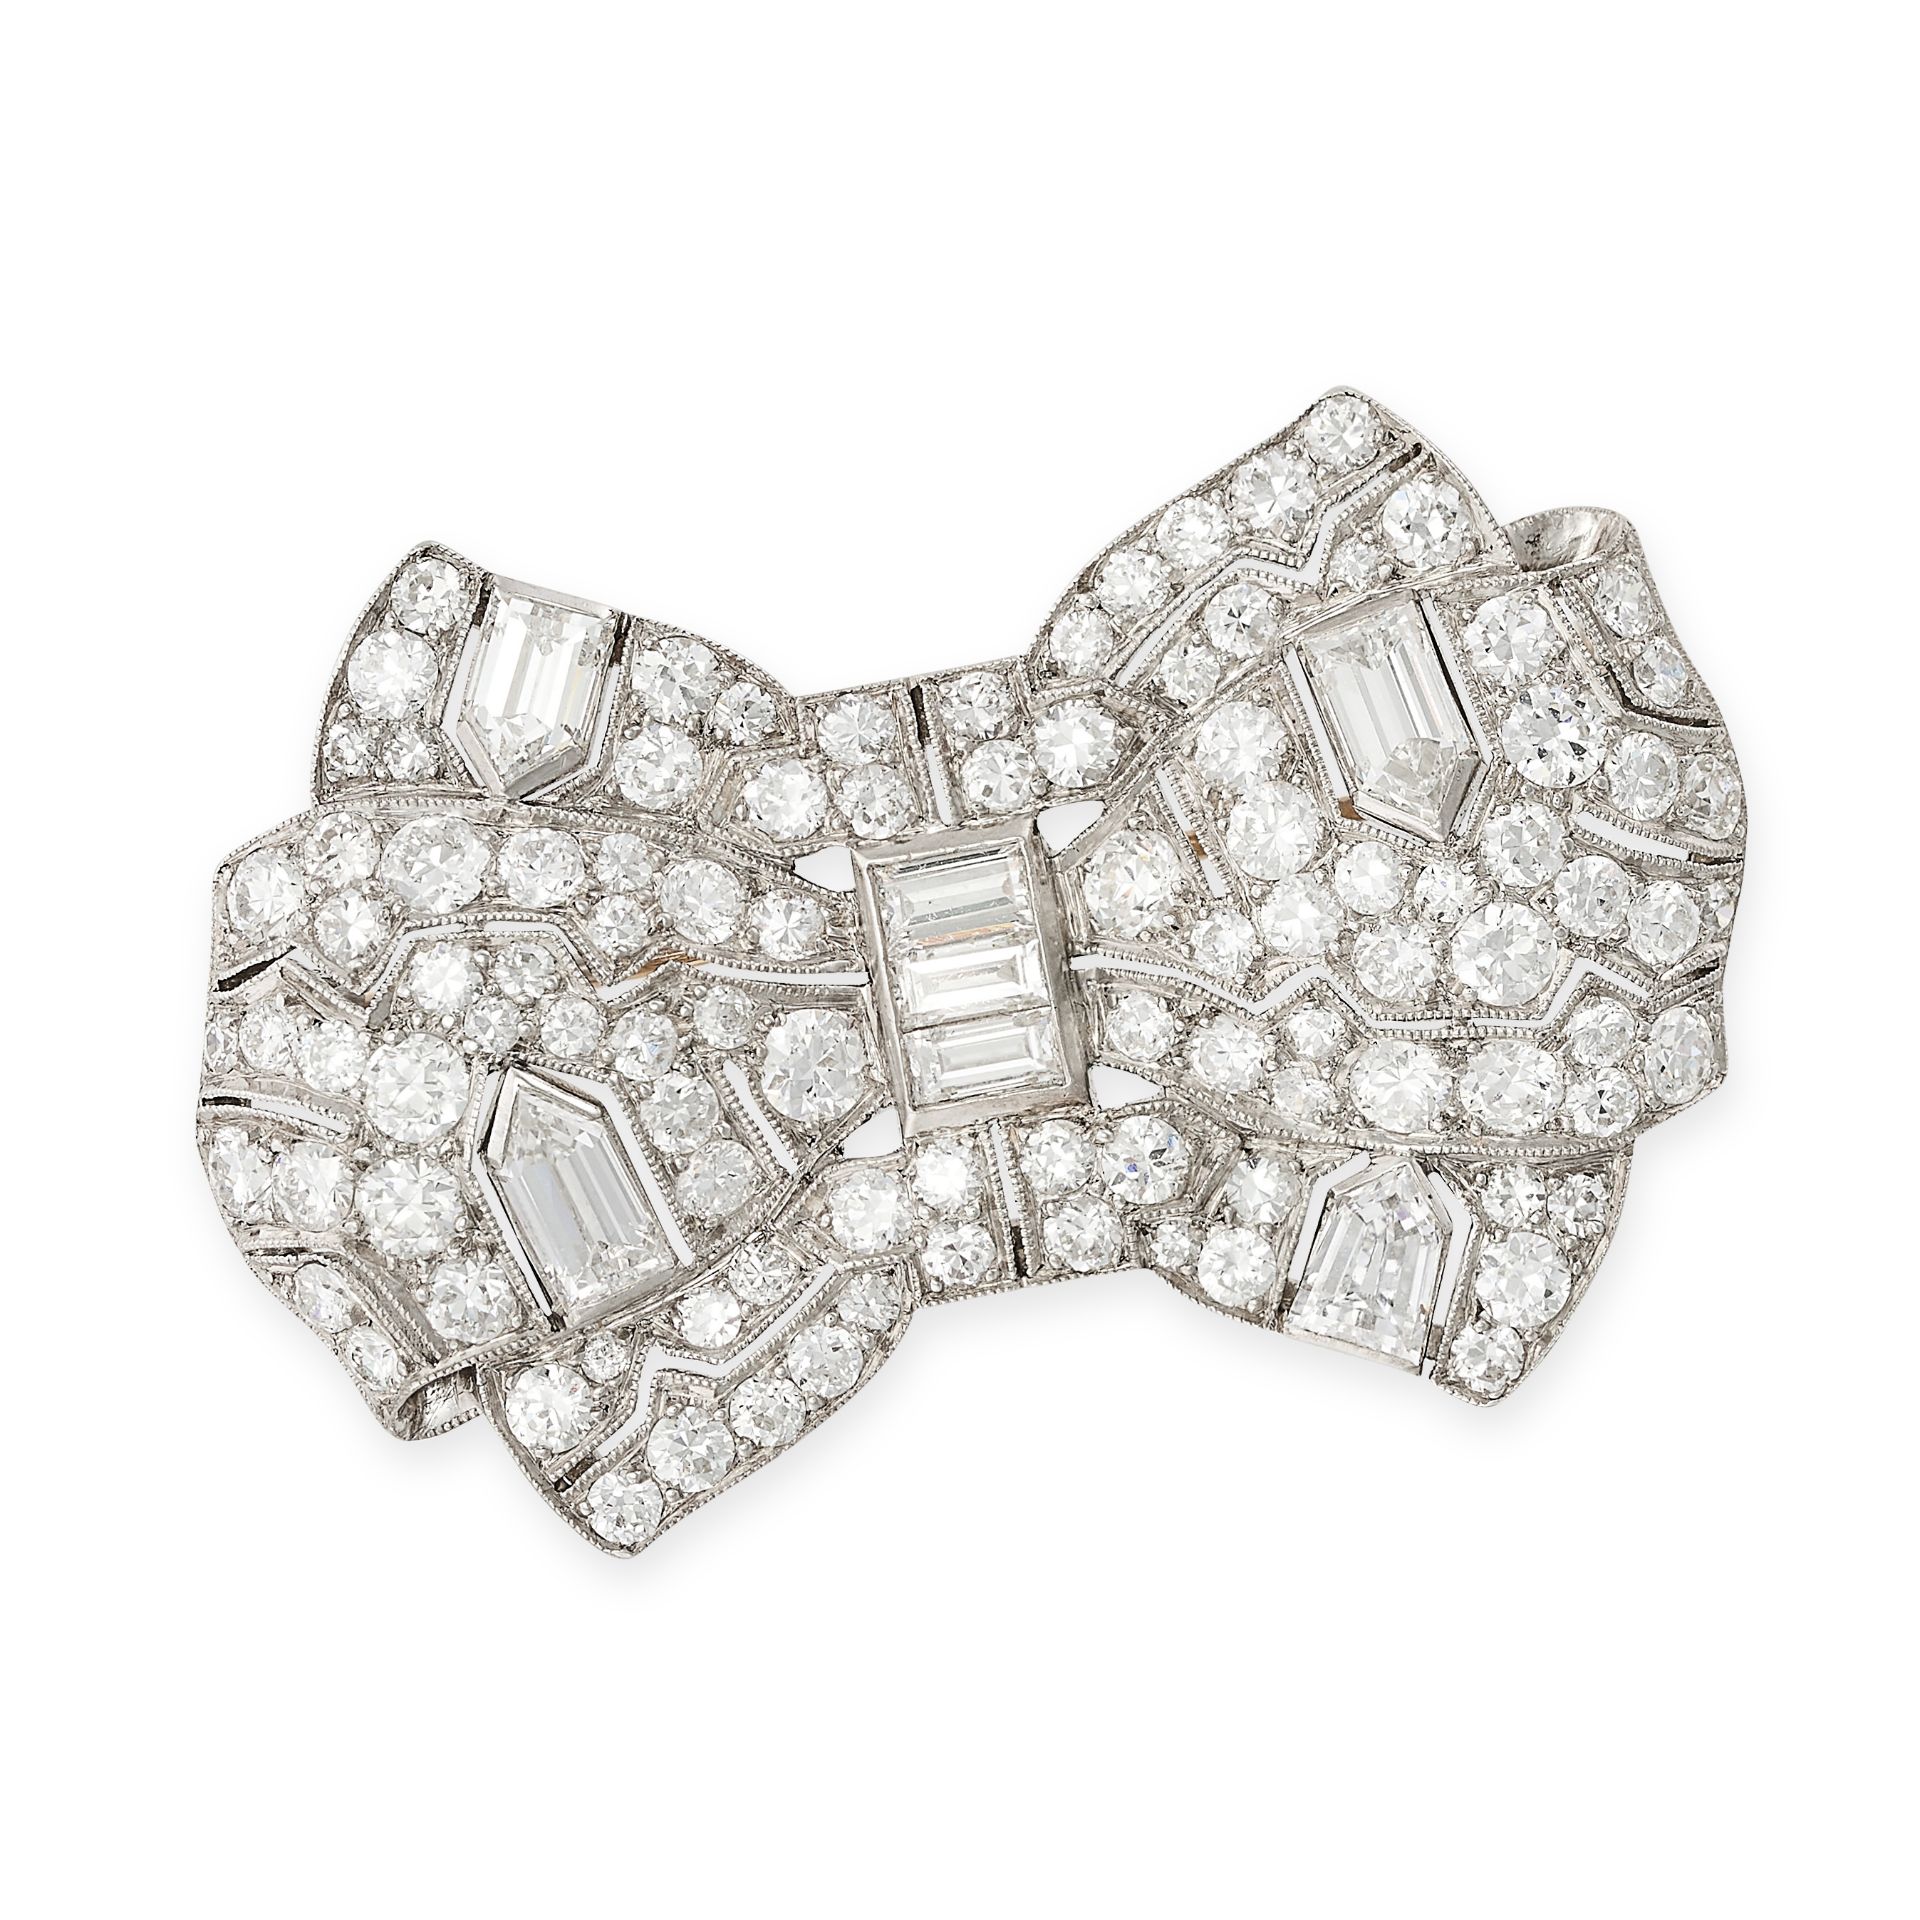 TIFFANY & CO, A FINE ART DECO DIAMOND BOW BROOCH in platinum, designed as a bow, set with round